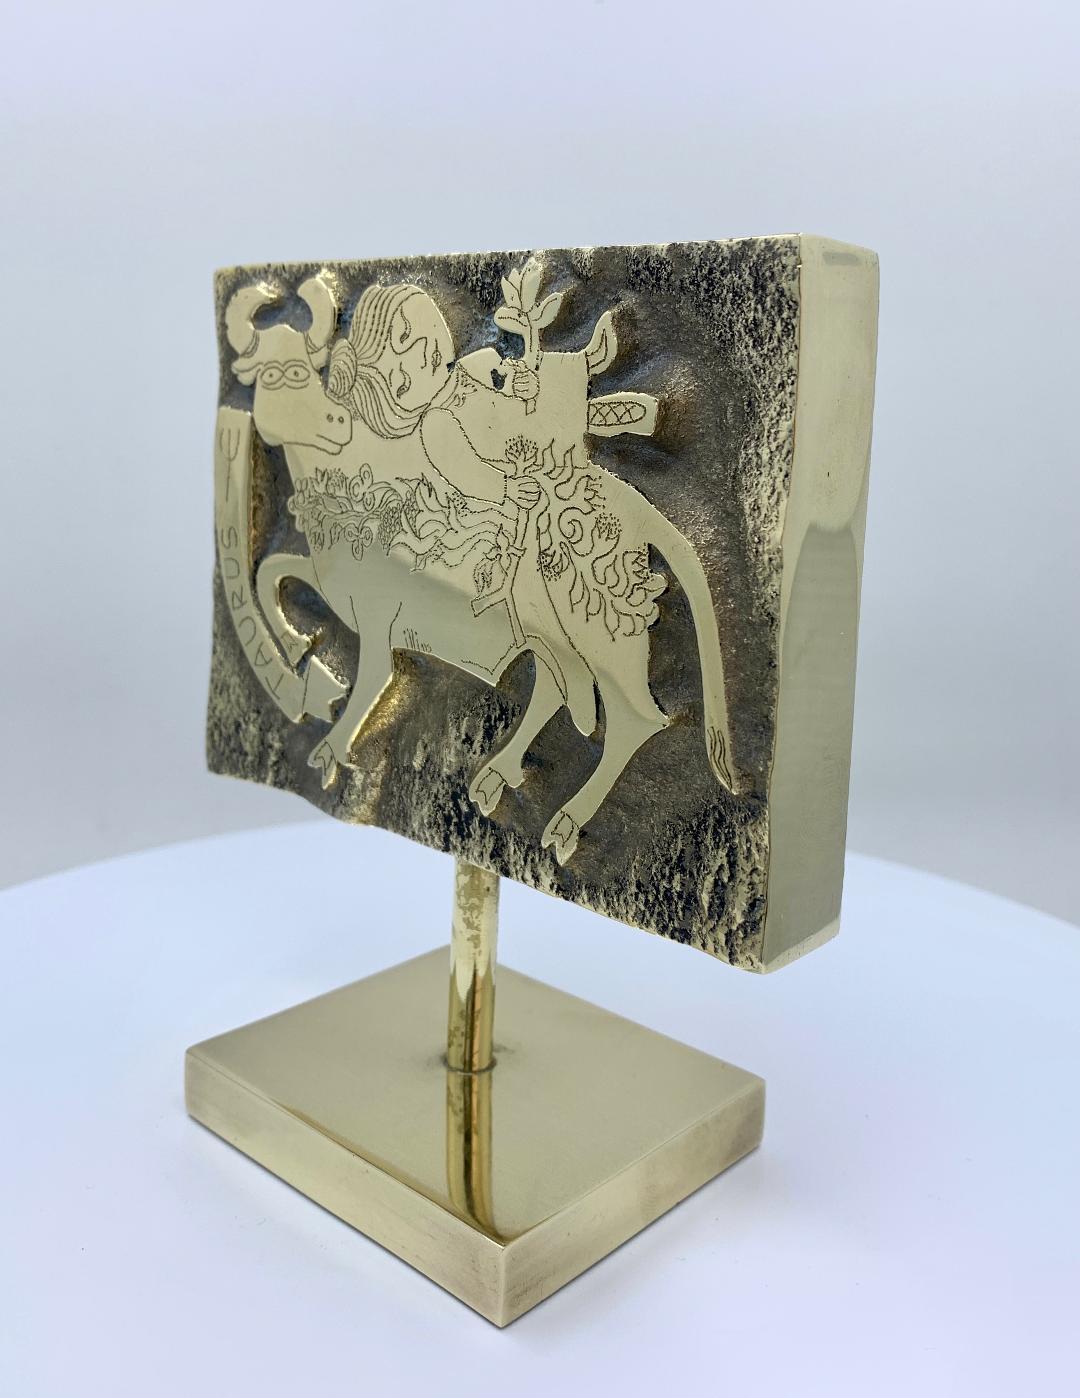 The perfect gift for the Taurus in your life! Taurus is the birth sign of the zodiac for those born between April 19th-May 20th.

Richly textural, hand tooled high relief solid heavy brass rectangular block stamp sculpture from the 1960s features